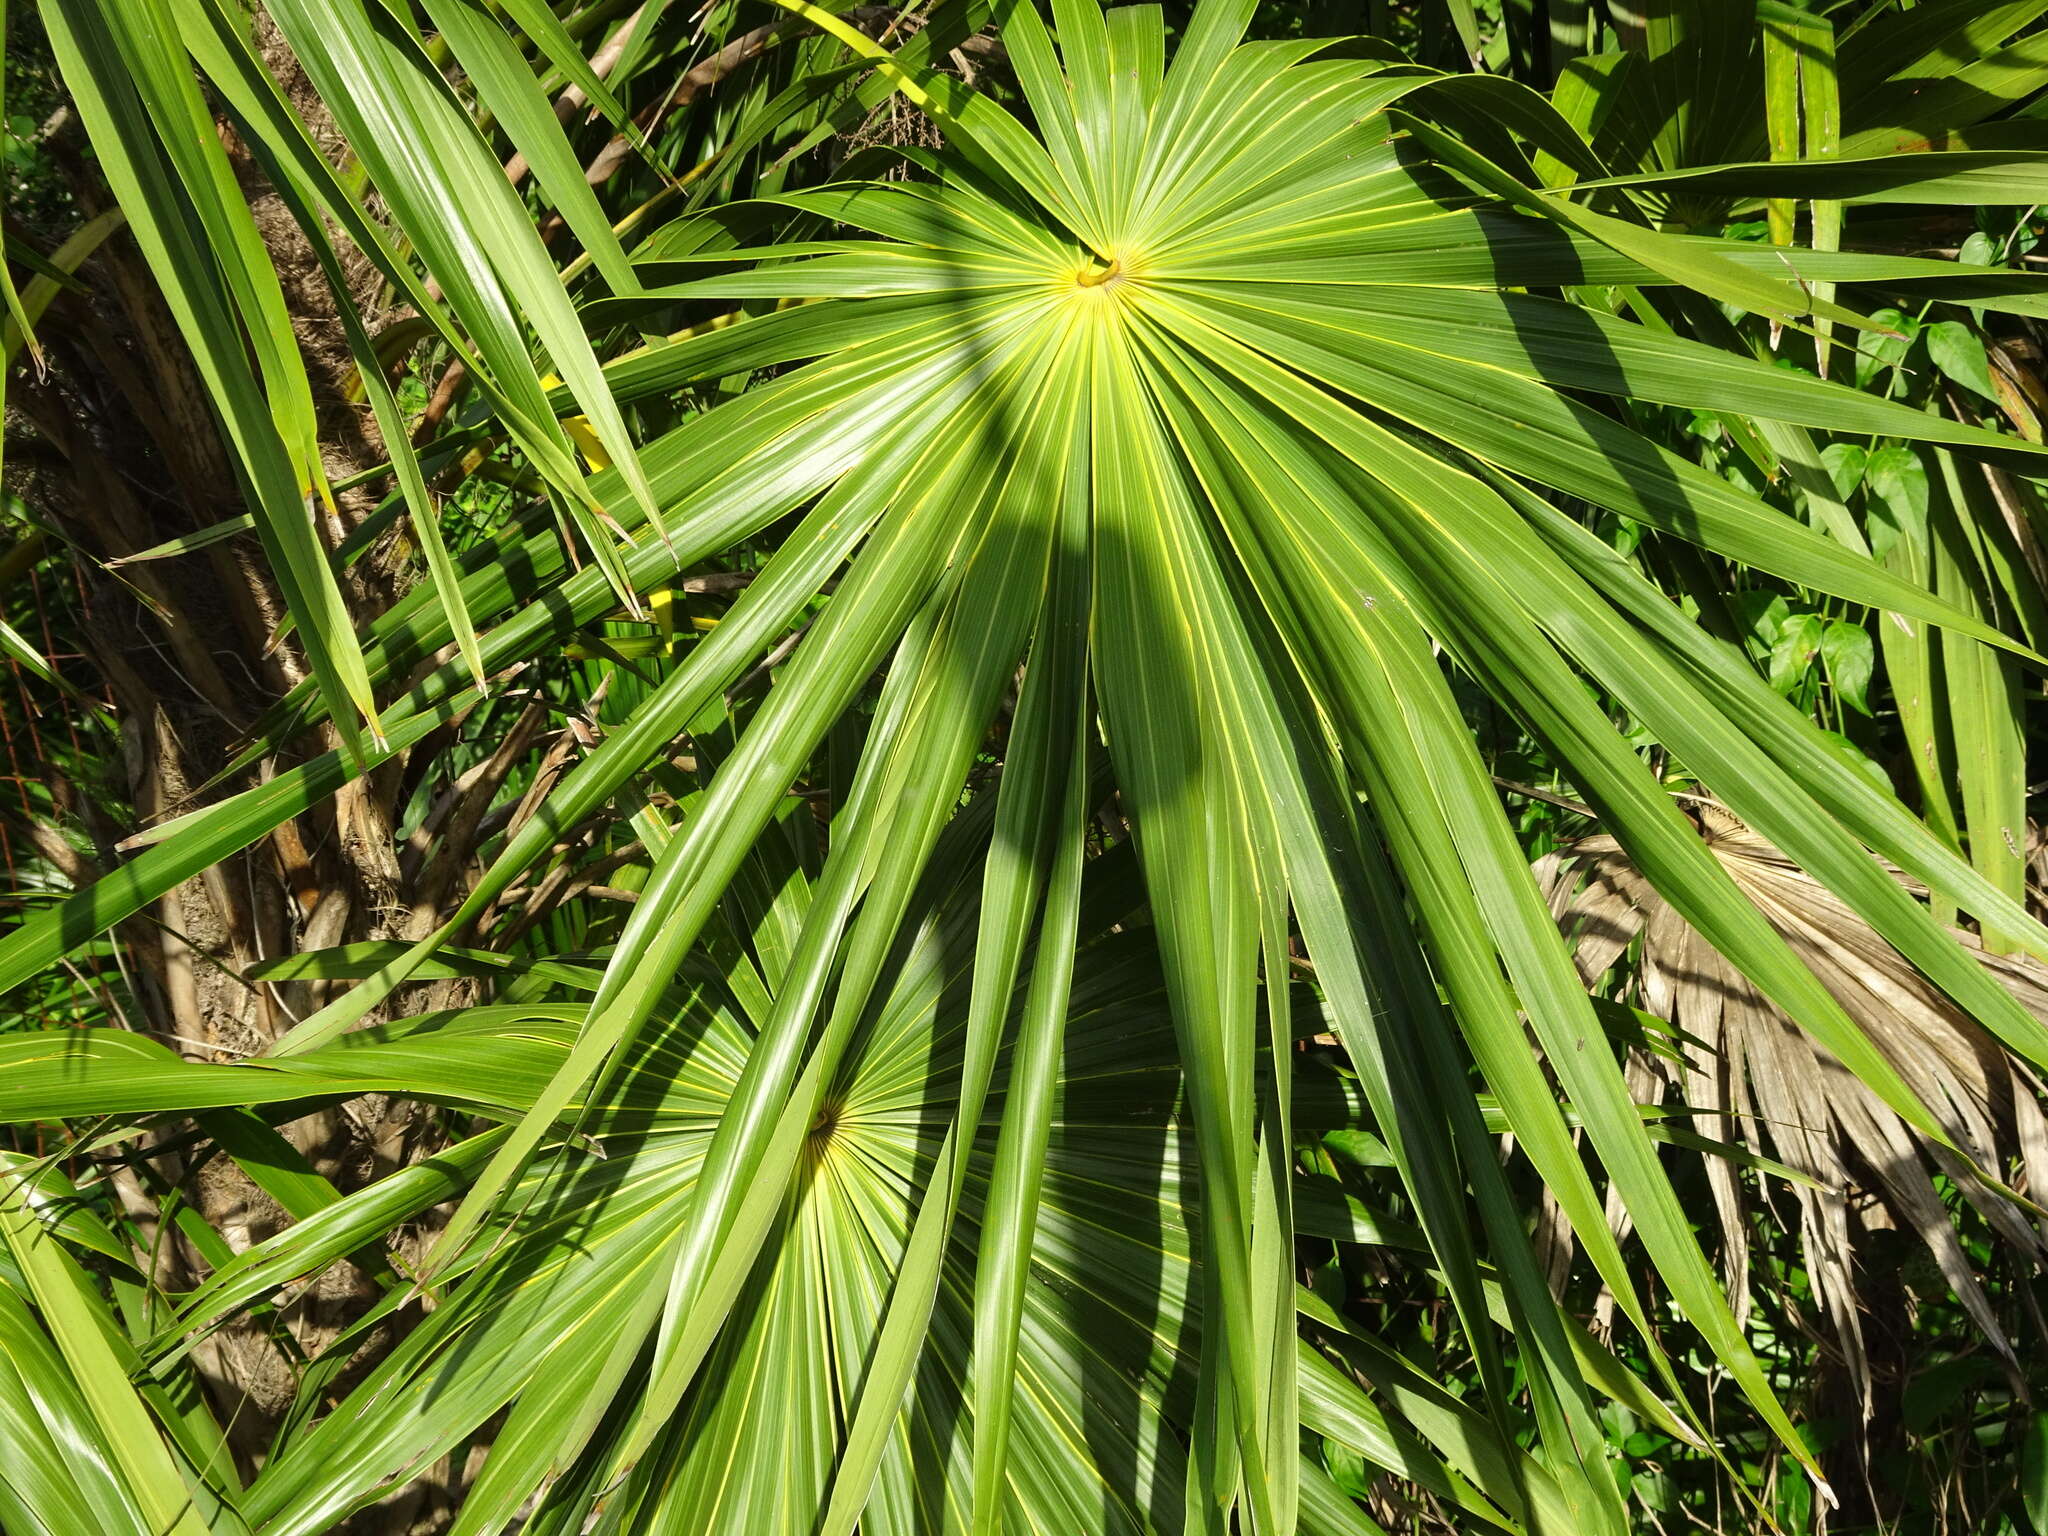 Image of thatch palm